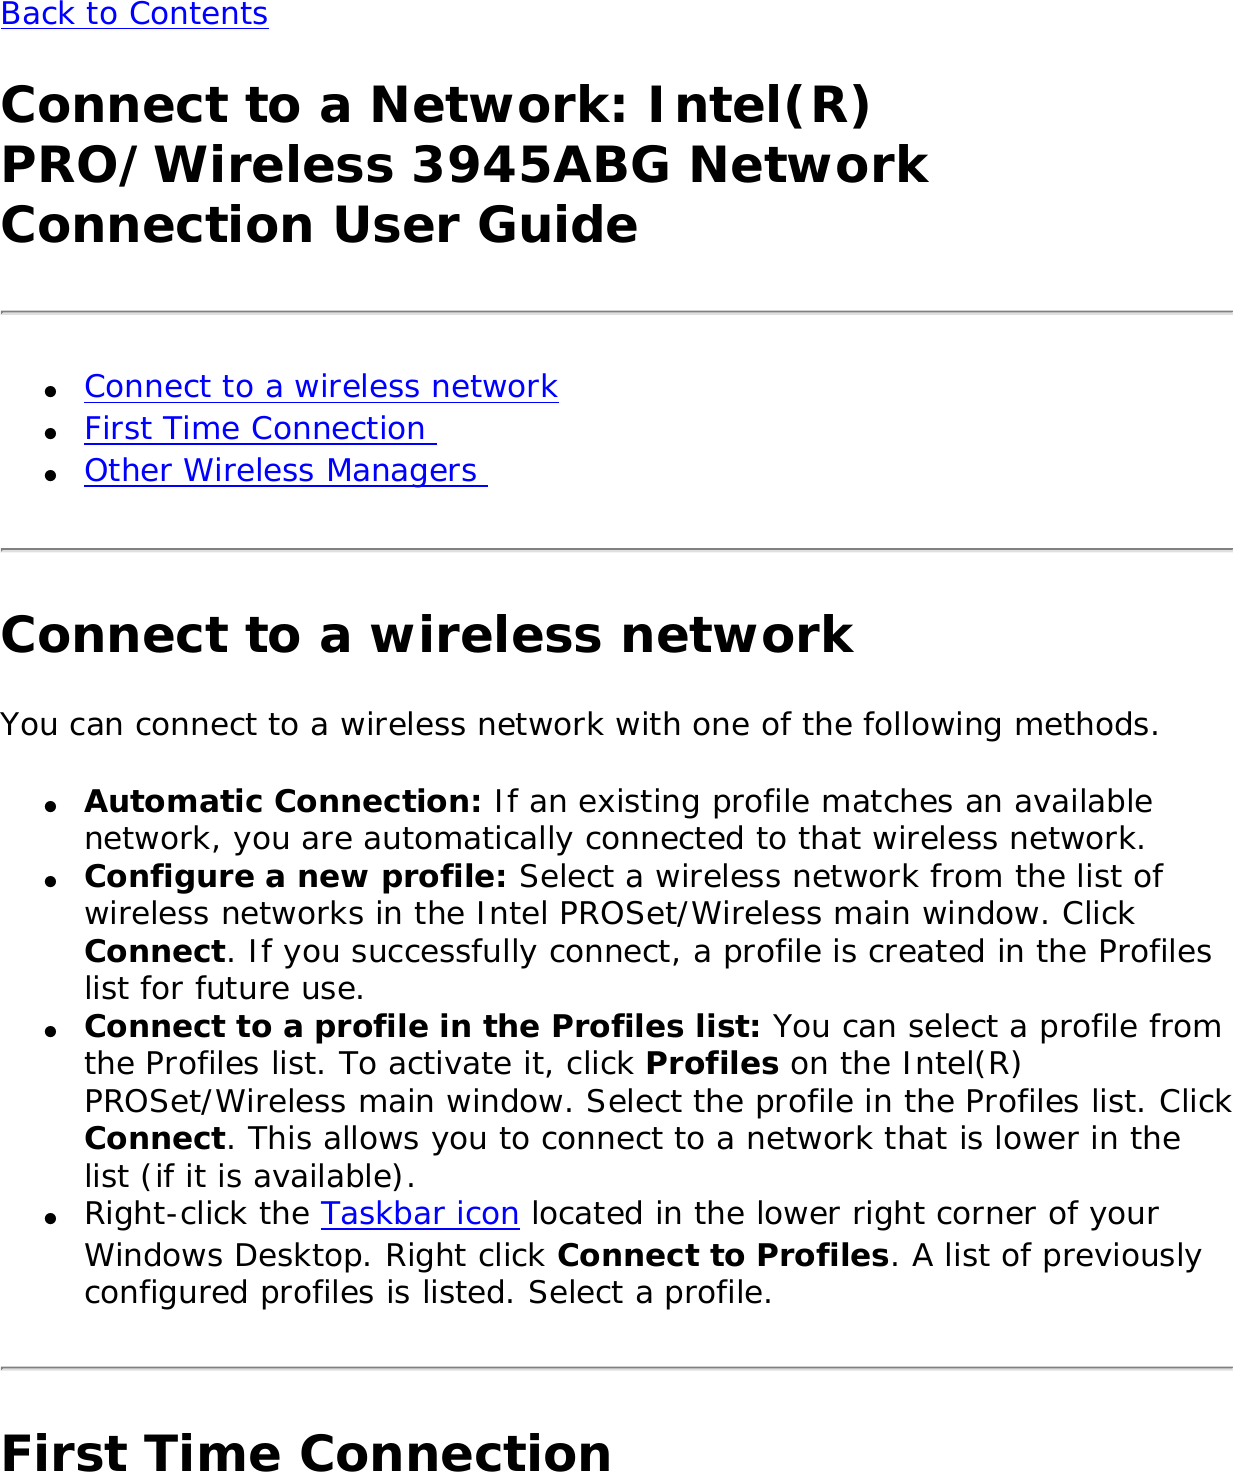 Back to Contents Connect to a Network: Intel(R) PRO/Wireless 3945ABG Network Connection User Guide●     Connect to a wireless network ●     First Time Connection ●     Other Wireless Managers Connect to a wireless networkYou can connect to a wireless network with one of the following methods. ●     Automatic Connection: If an existing profile matches an available network, you are automatically connected to that wireless network. ●     Configure a new profile: Select a wireless network from the list of wireless networks in the Intel PROSet/Wireless main window. Click Connect. If you successfully connect, a profile is created in the Profiles list for future use.●     Connect to a profile in the Profiles list: You can select a profile from the Profiles list. To activate it, click Profiles on the Intel(R) PROSet/Wireless main window. Select the profile in the Profiles list. Click Connect. This allows you to connect to a network that is lower in the list (if it is available). ●     Right-click the Taskbar icon located in the lower right corner of your Windows Desktop. Right click Connect to Profiles. A list of previously configured profiles is listed. Select a profile.First Time Connection